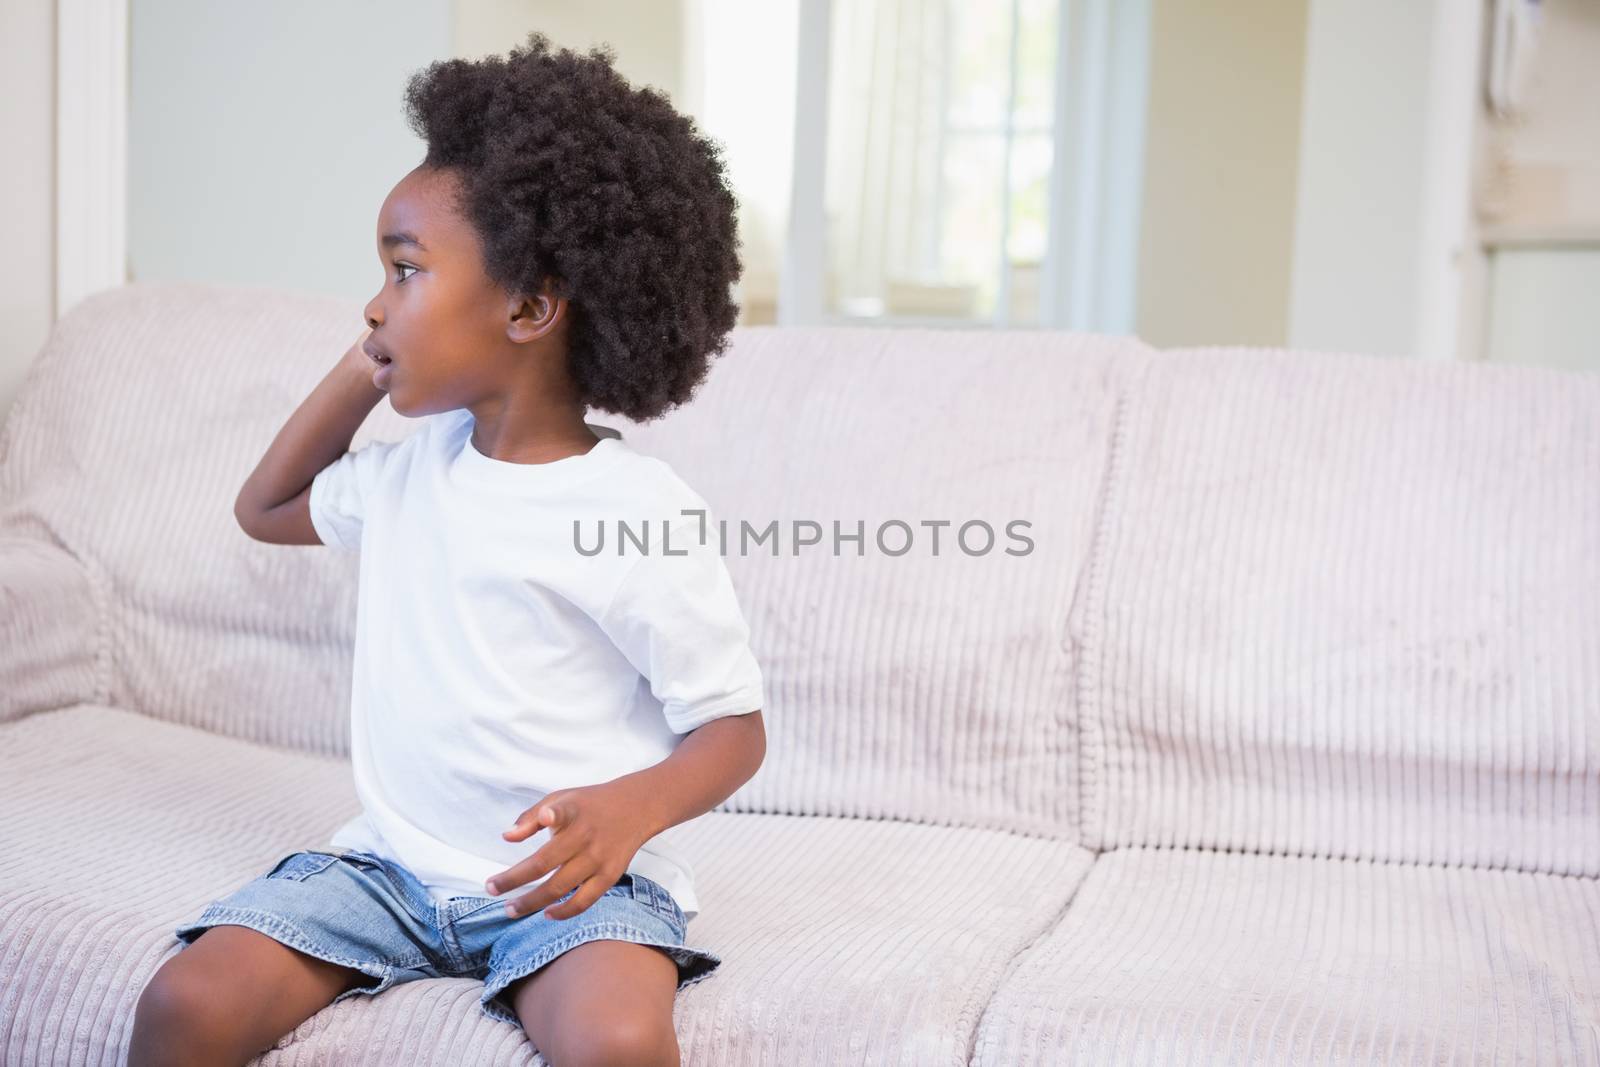 Little boy using a technology and phoning  by Wavebreakmedia